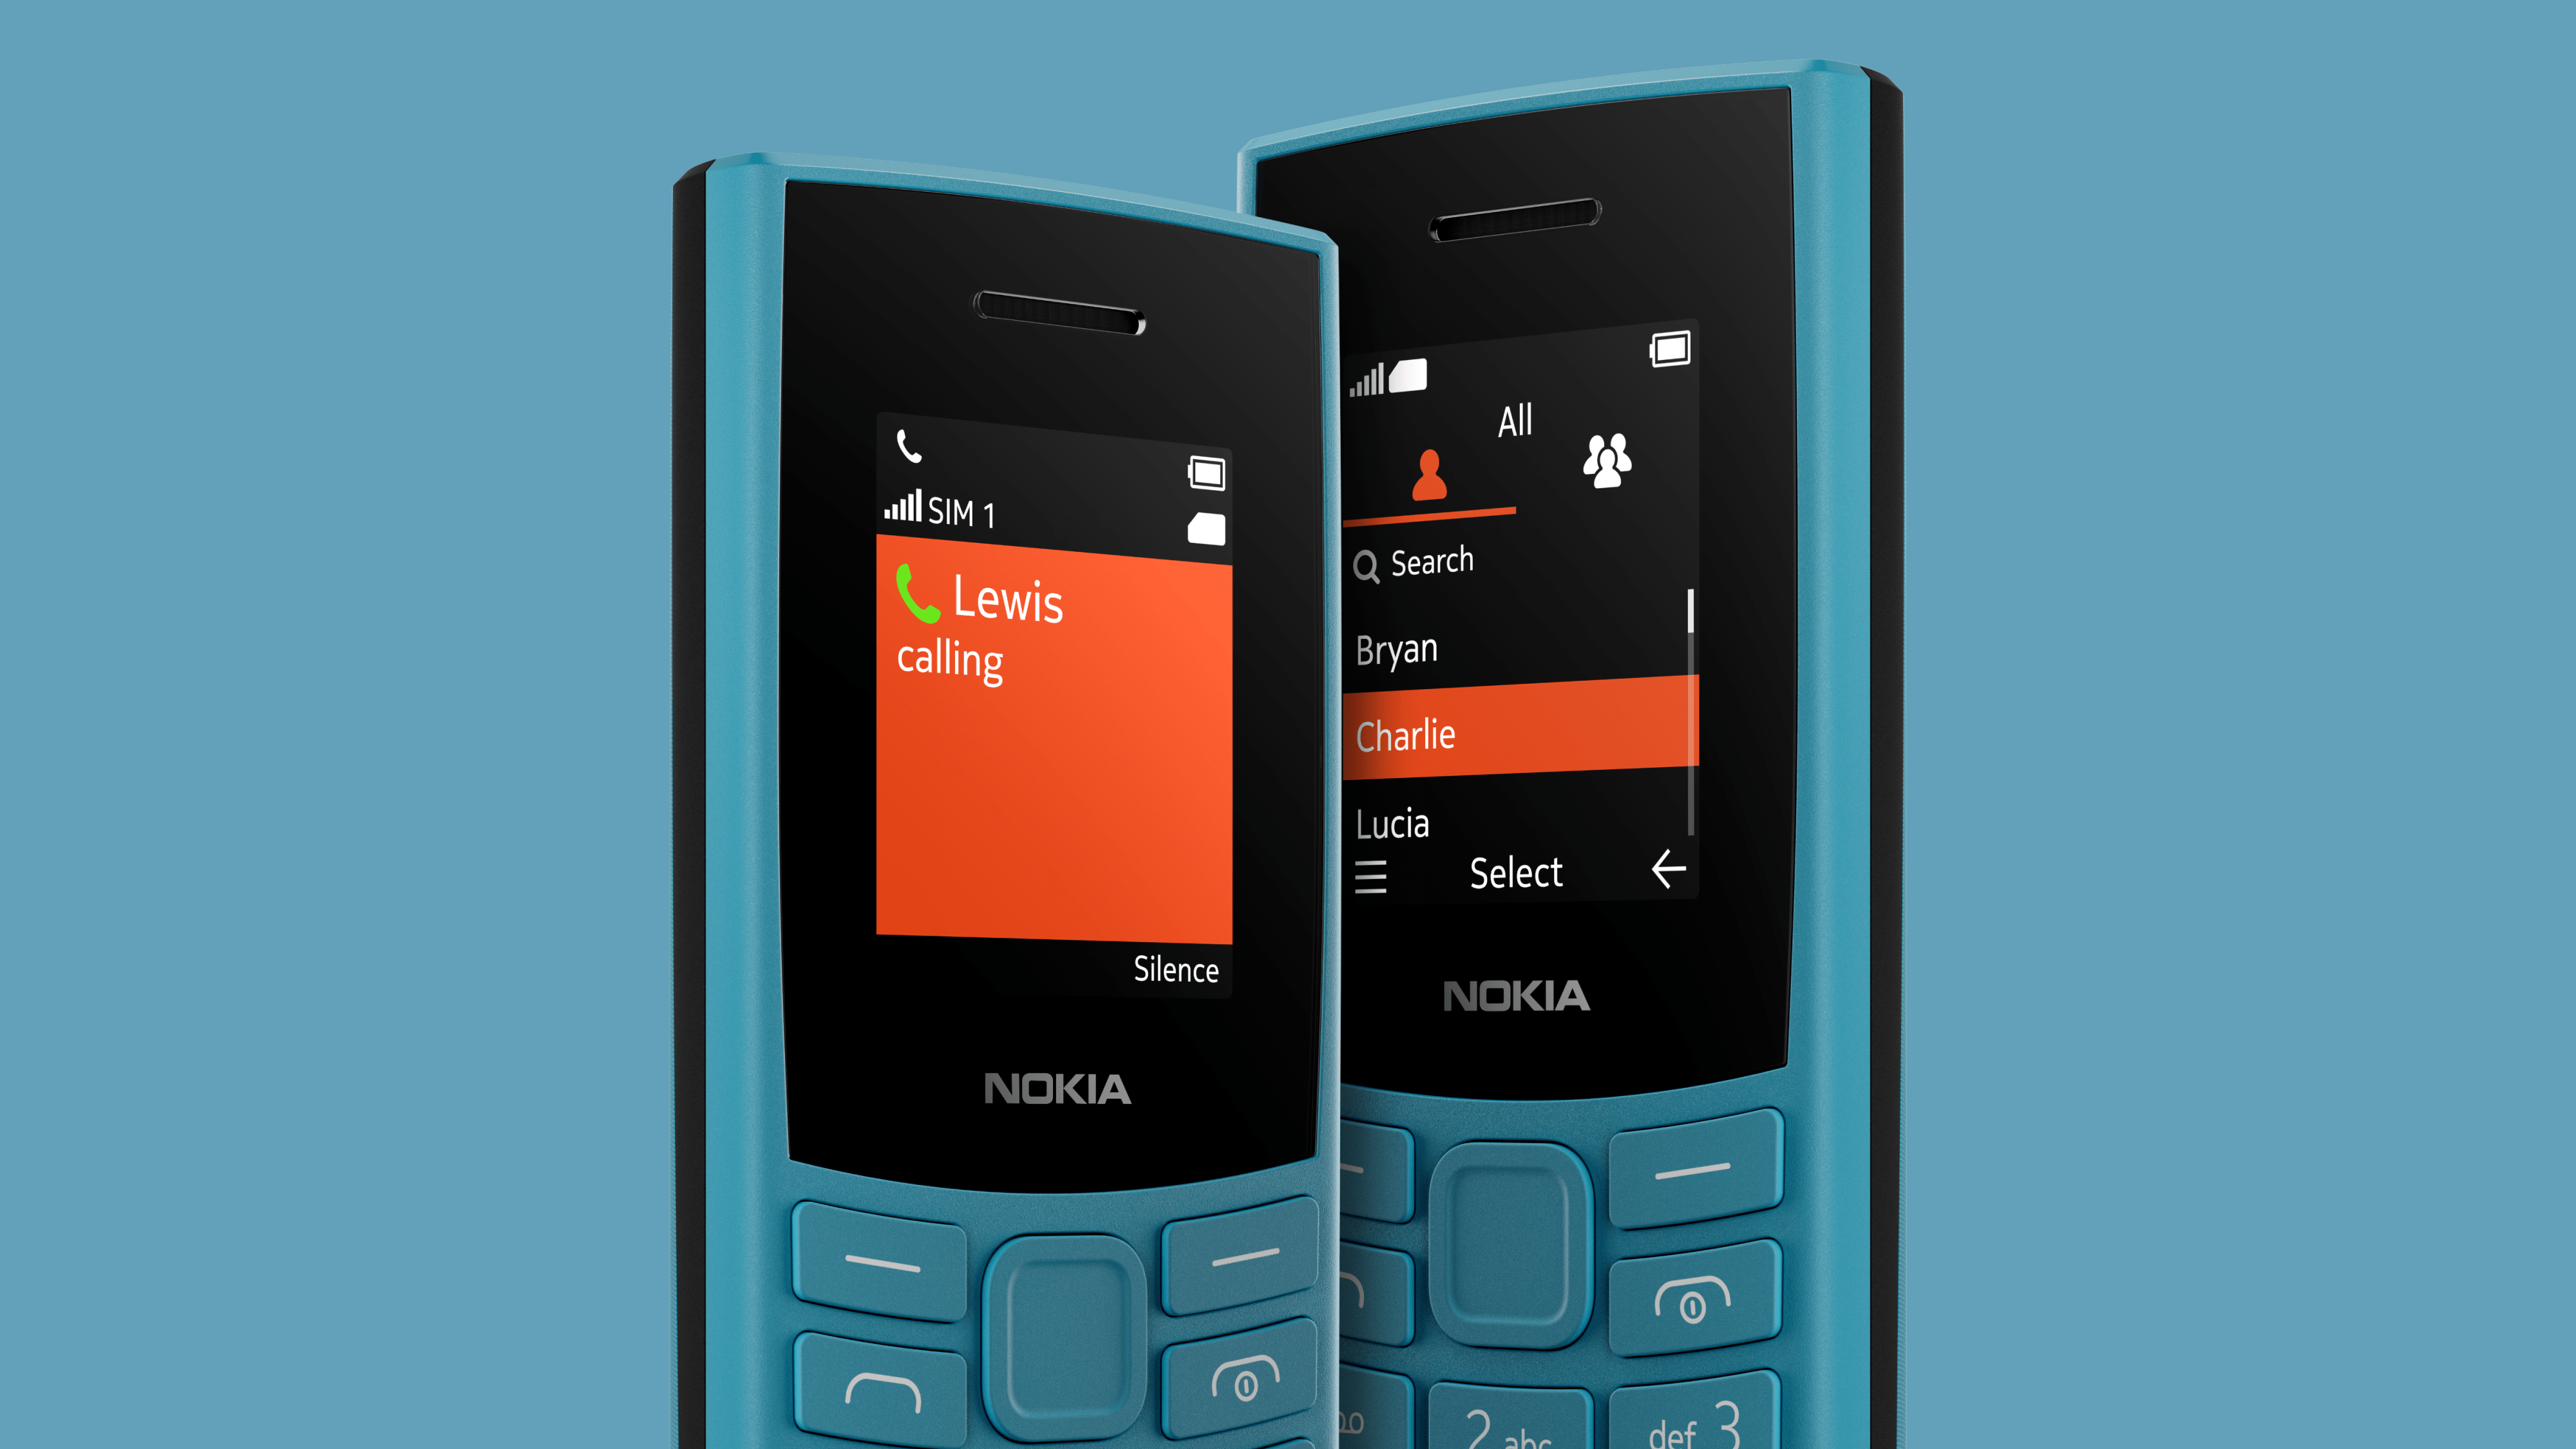 Nokia 105 feature 4G internet phone with